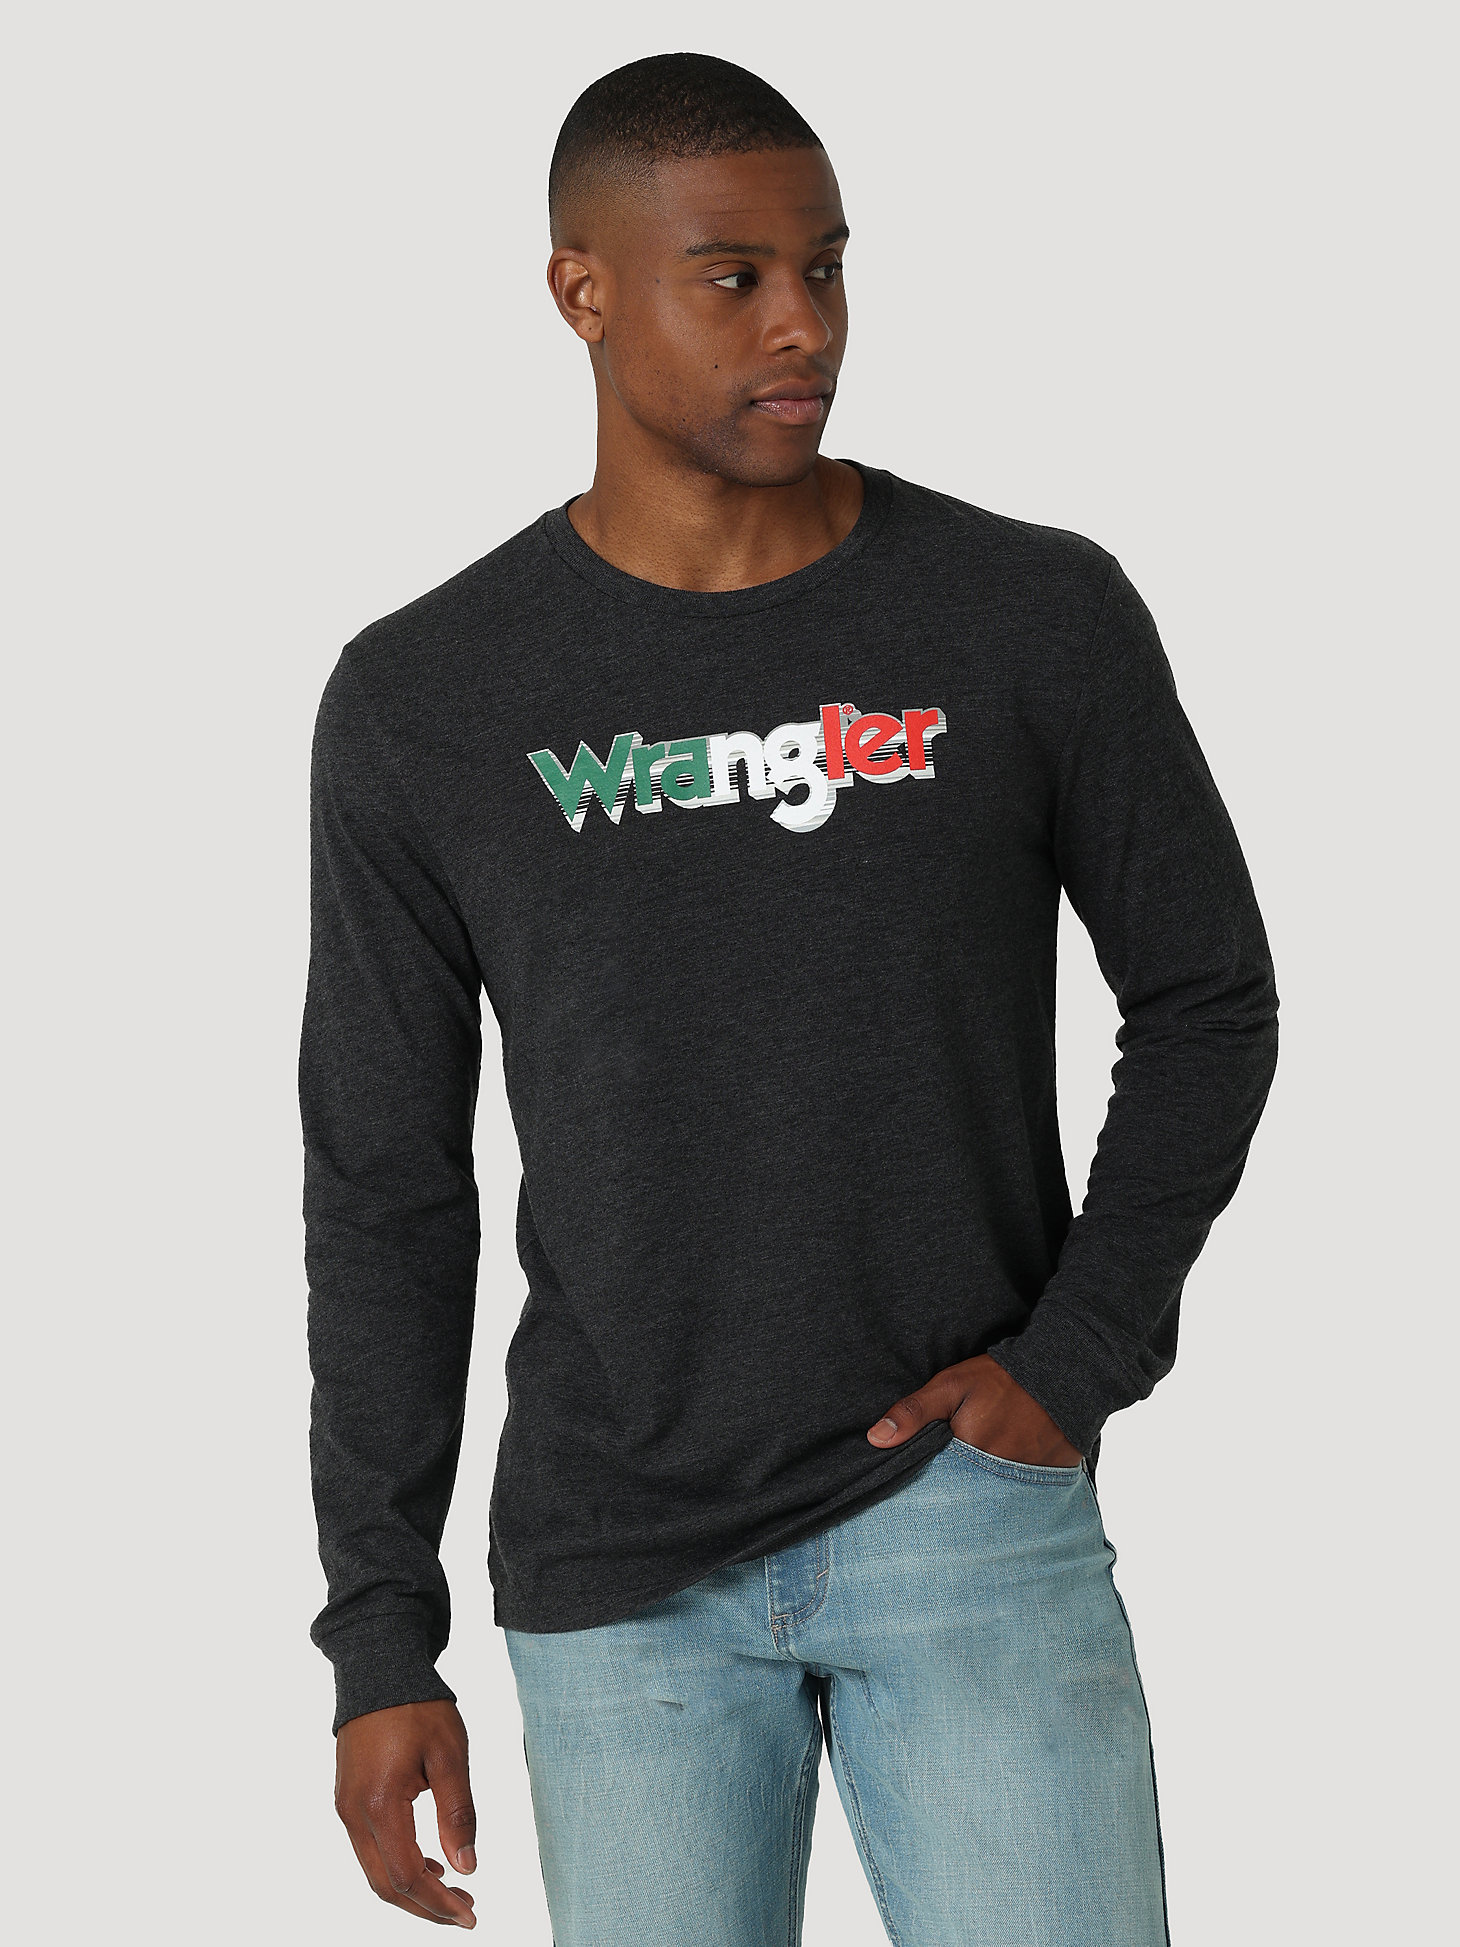 Men's Long Sleeve Wrangler Mexican Flag T-Shirt in Charcoal Heather main view